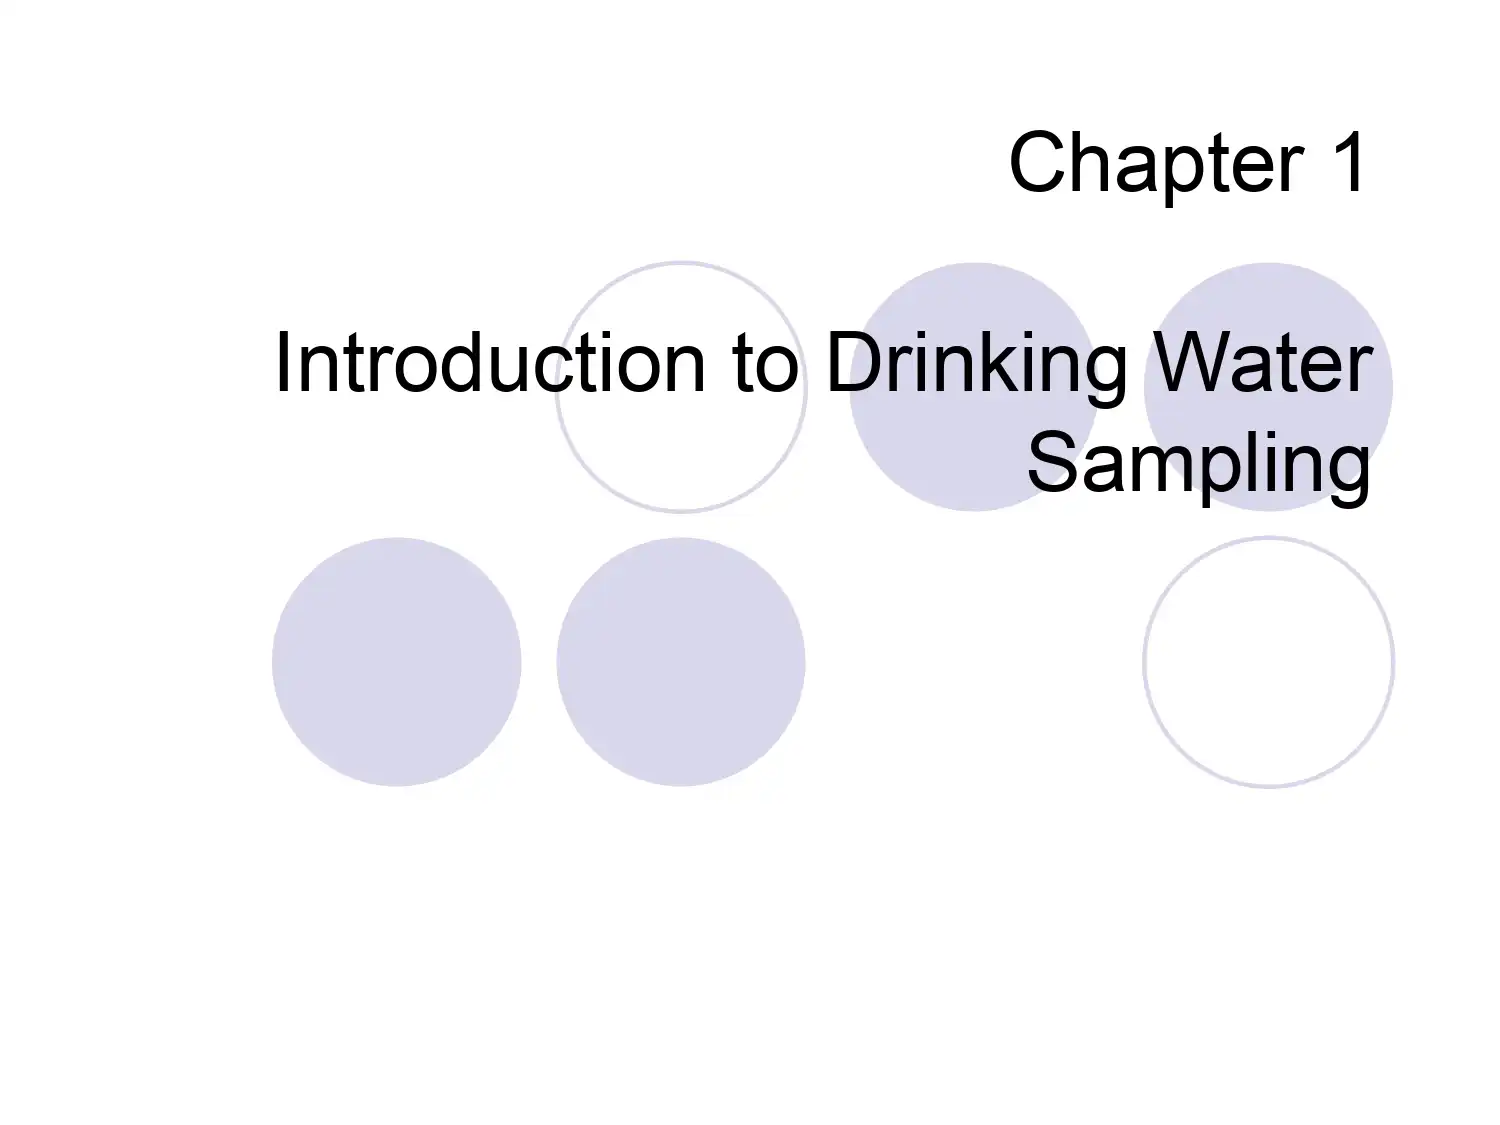 Chapter 1: Introduction to Drinking Water Sampling